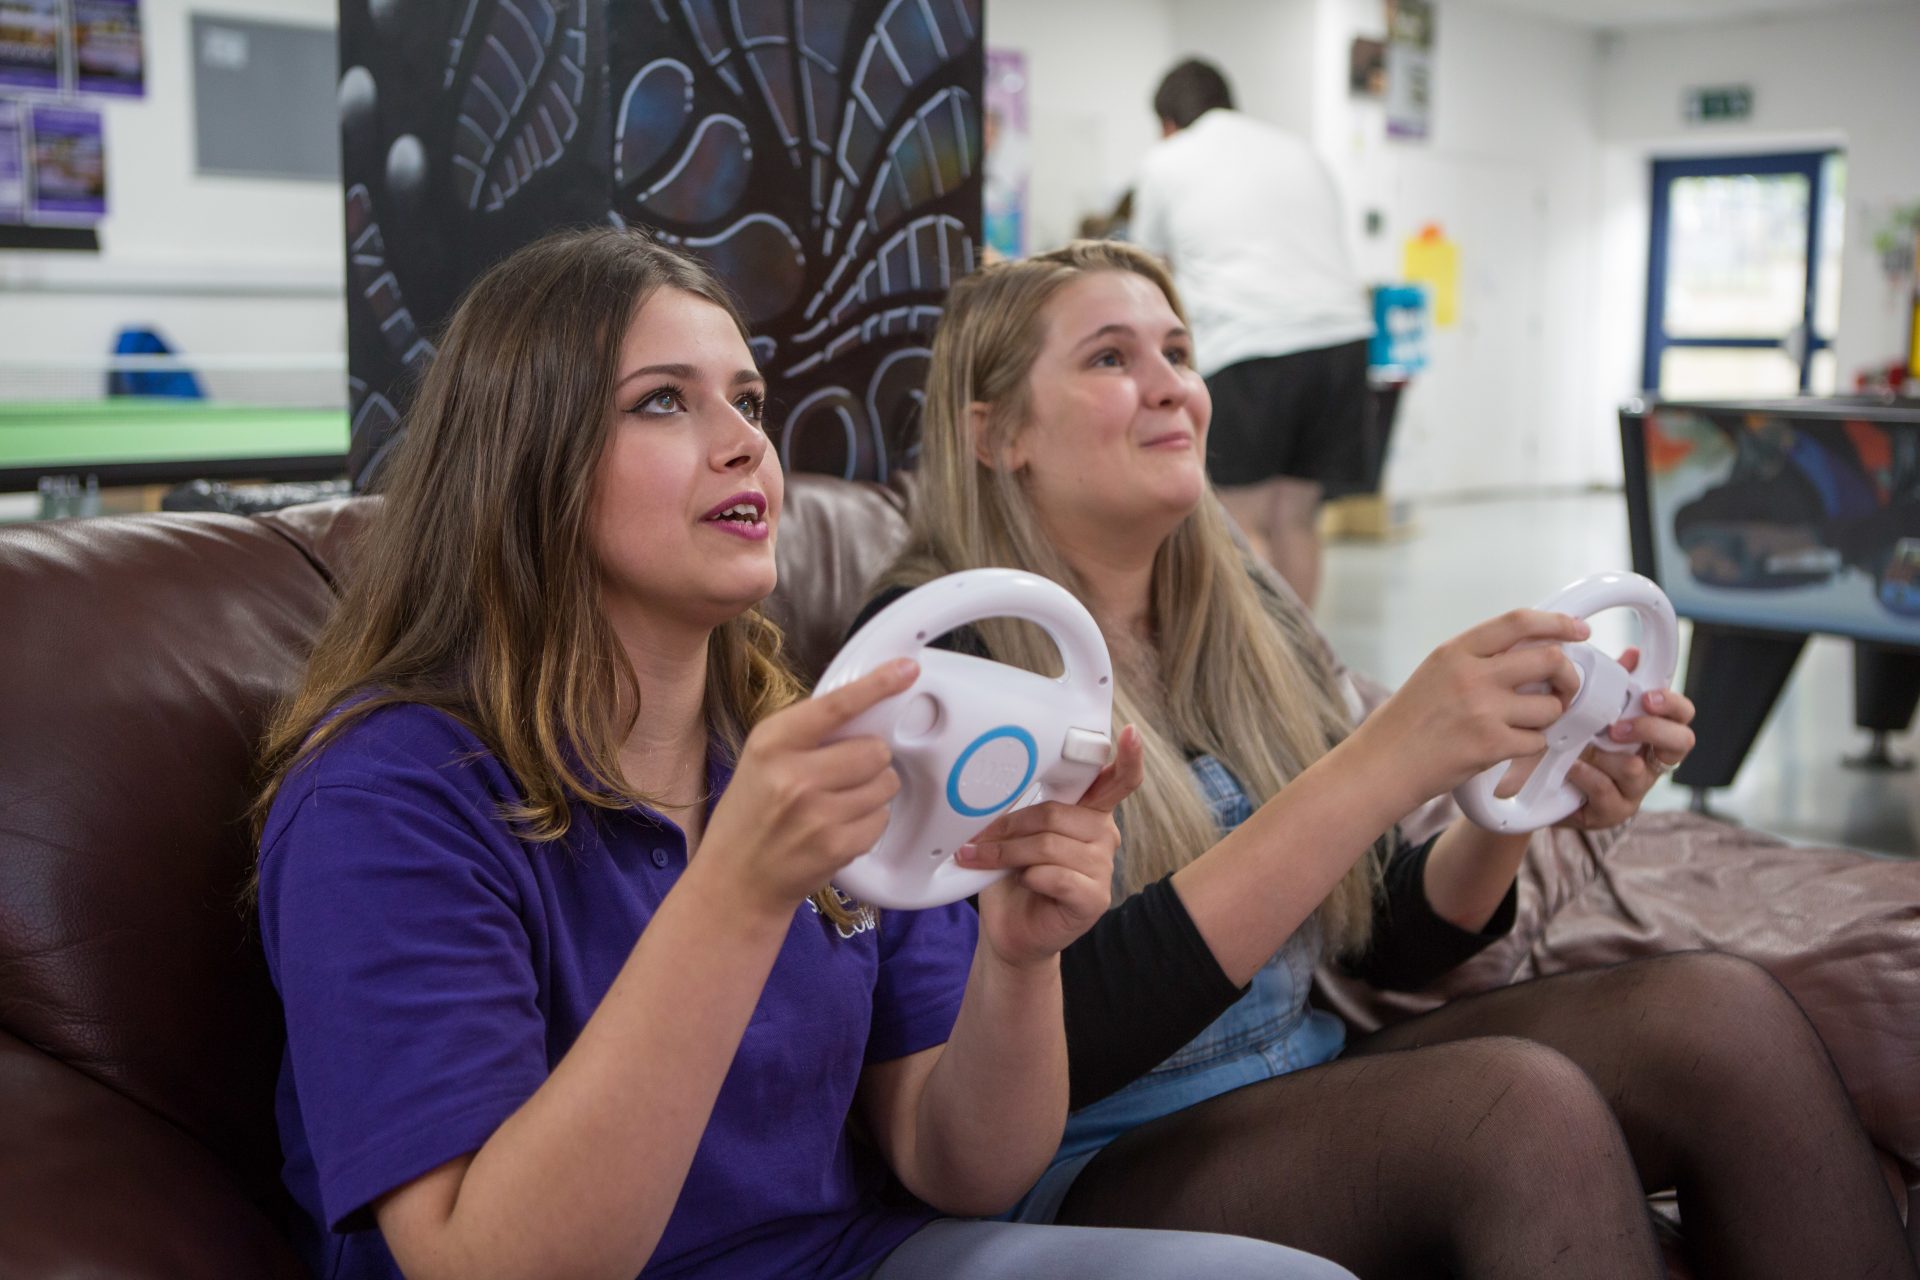 Students playing Wii in the student union common room